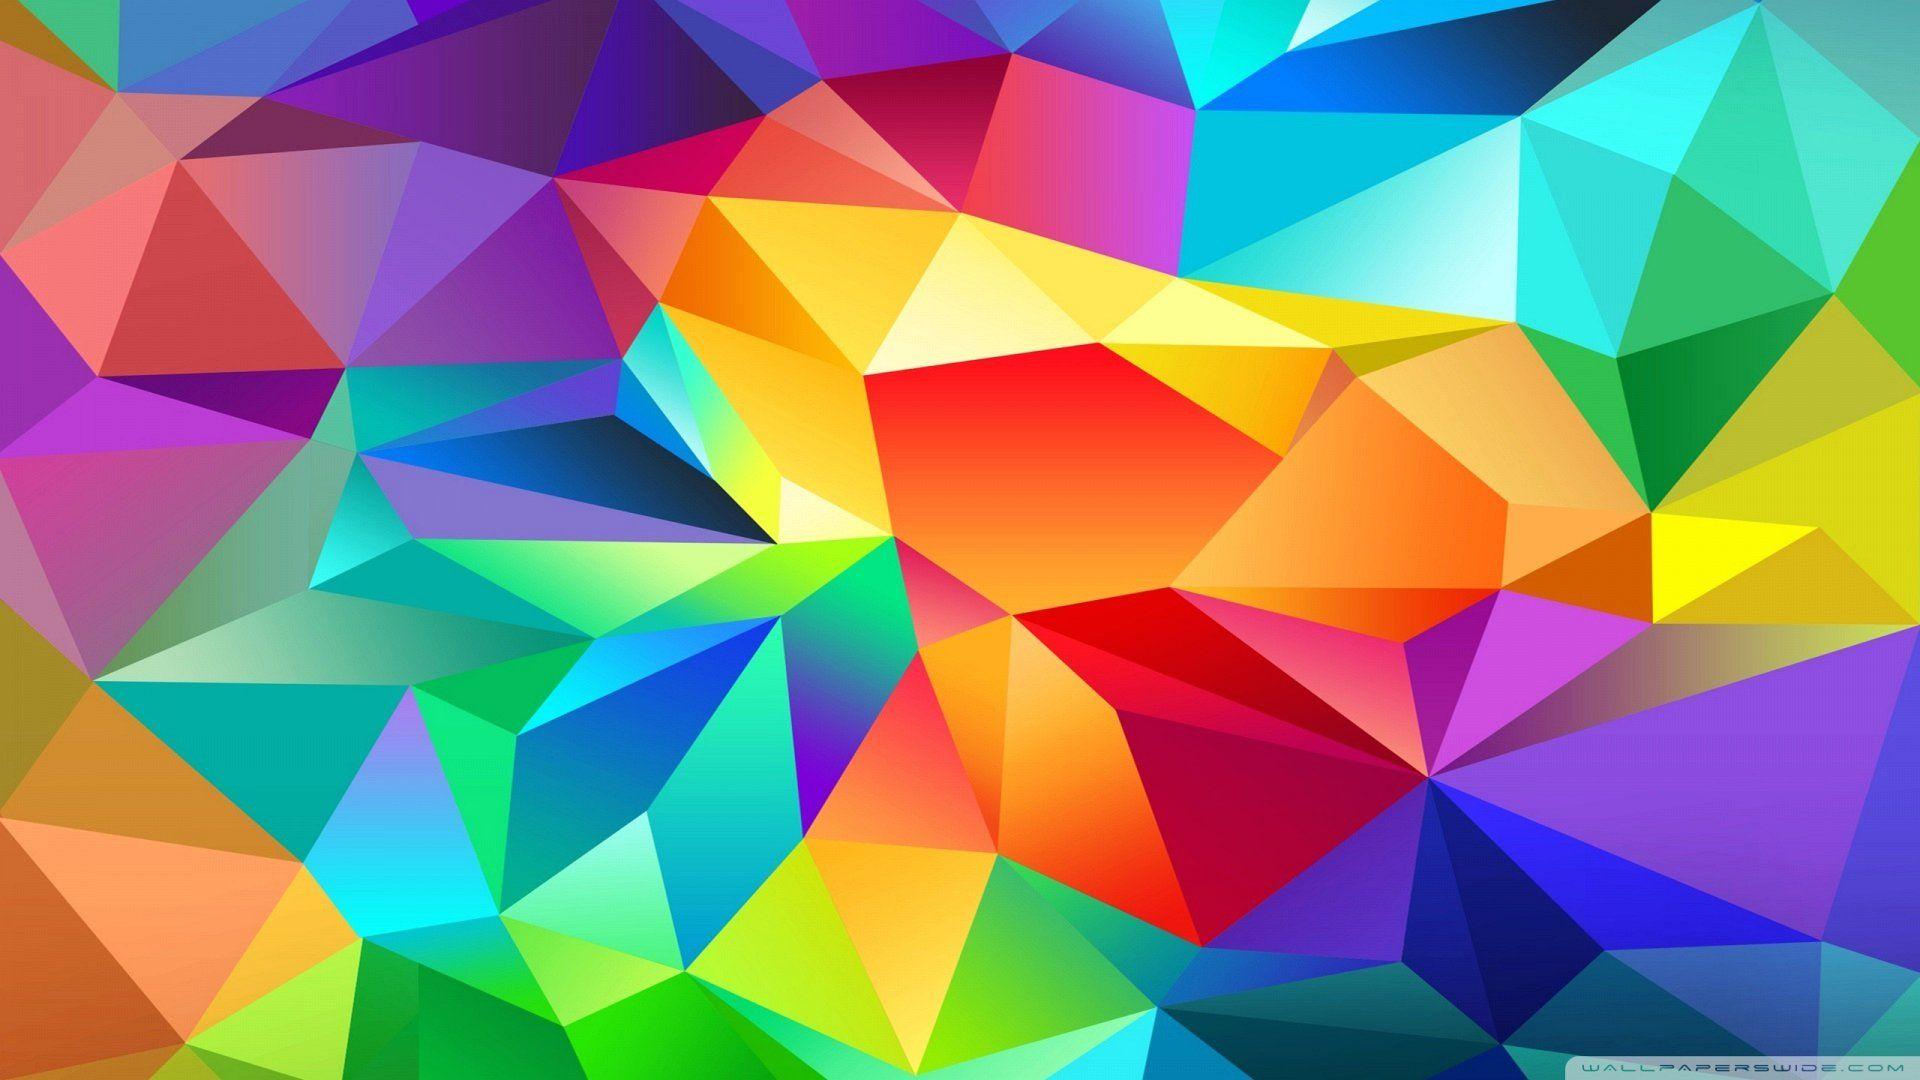 Mobile Phone Wallpaper With Geometric Polygon Background Images Free  Download on Lovepik  400509694